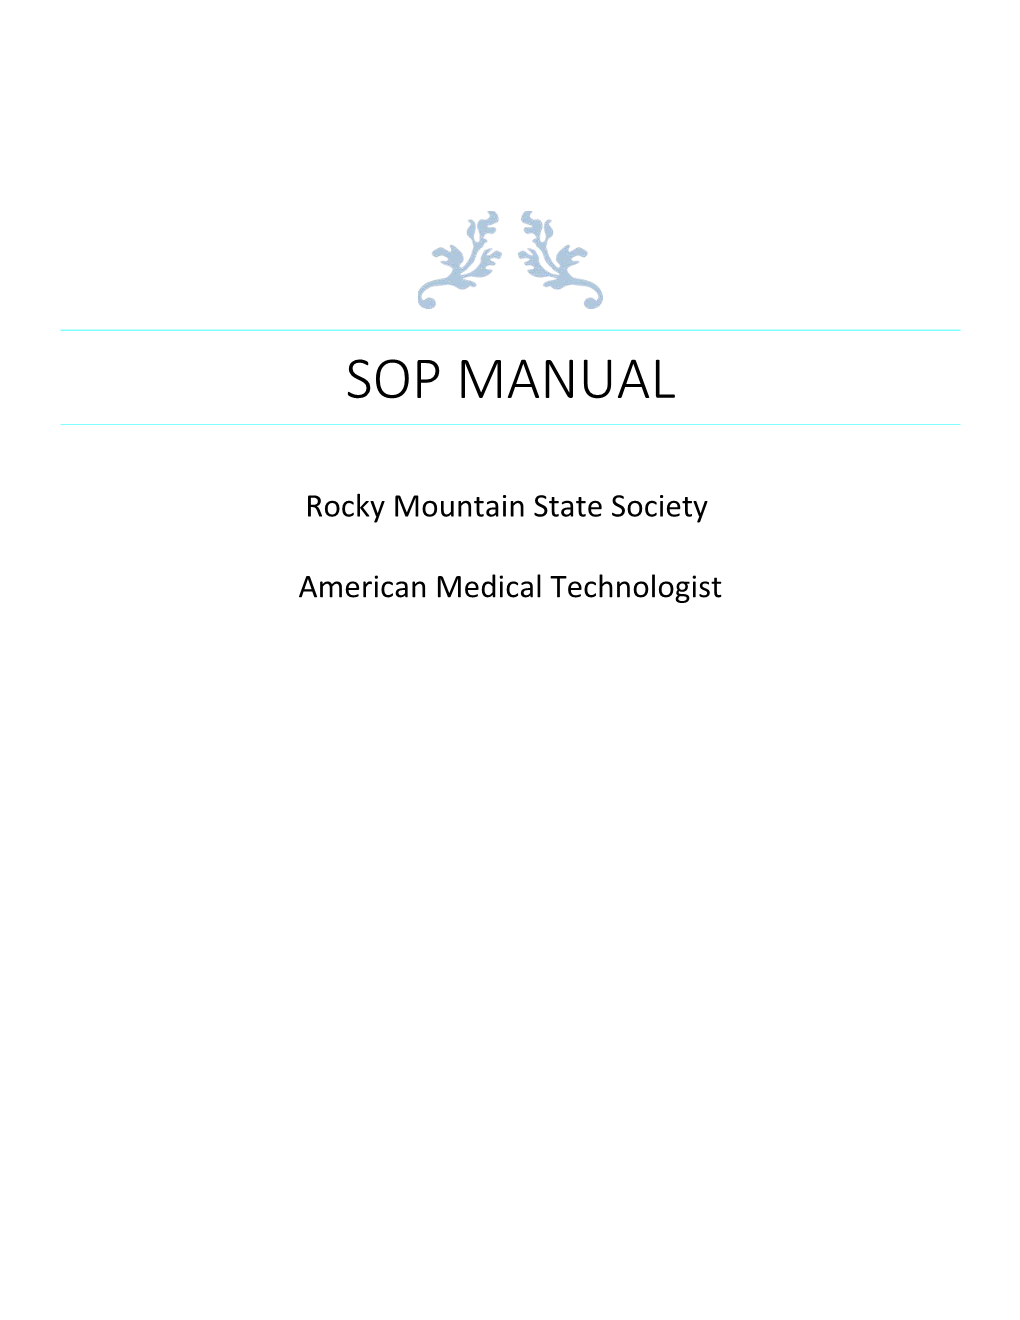 Rocky Mountain State Society of American Medical Technologist